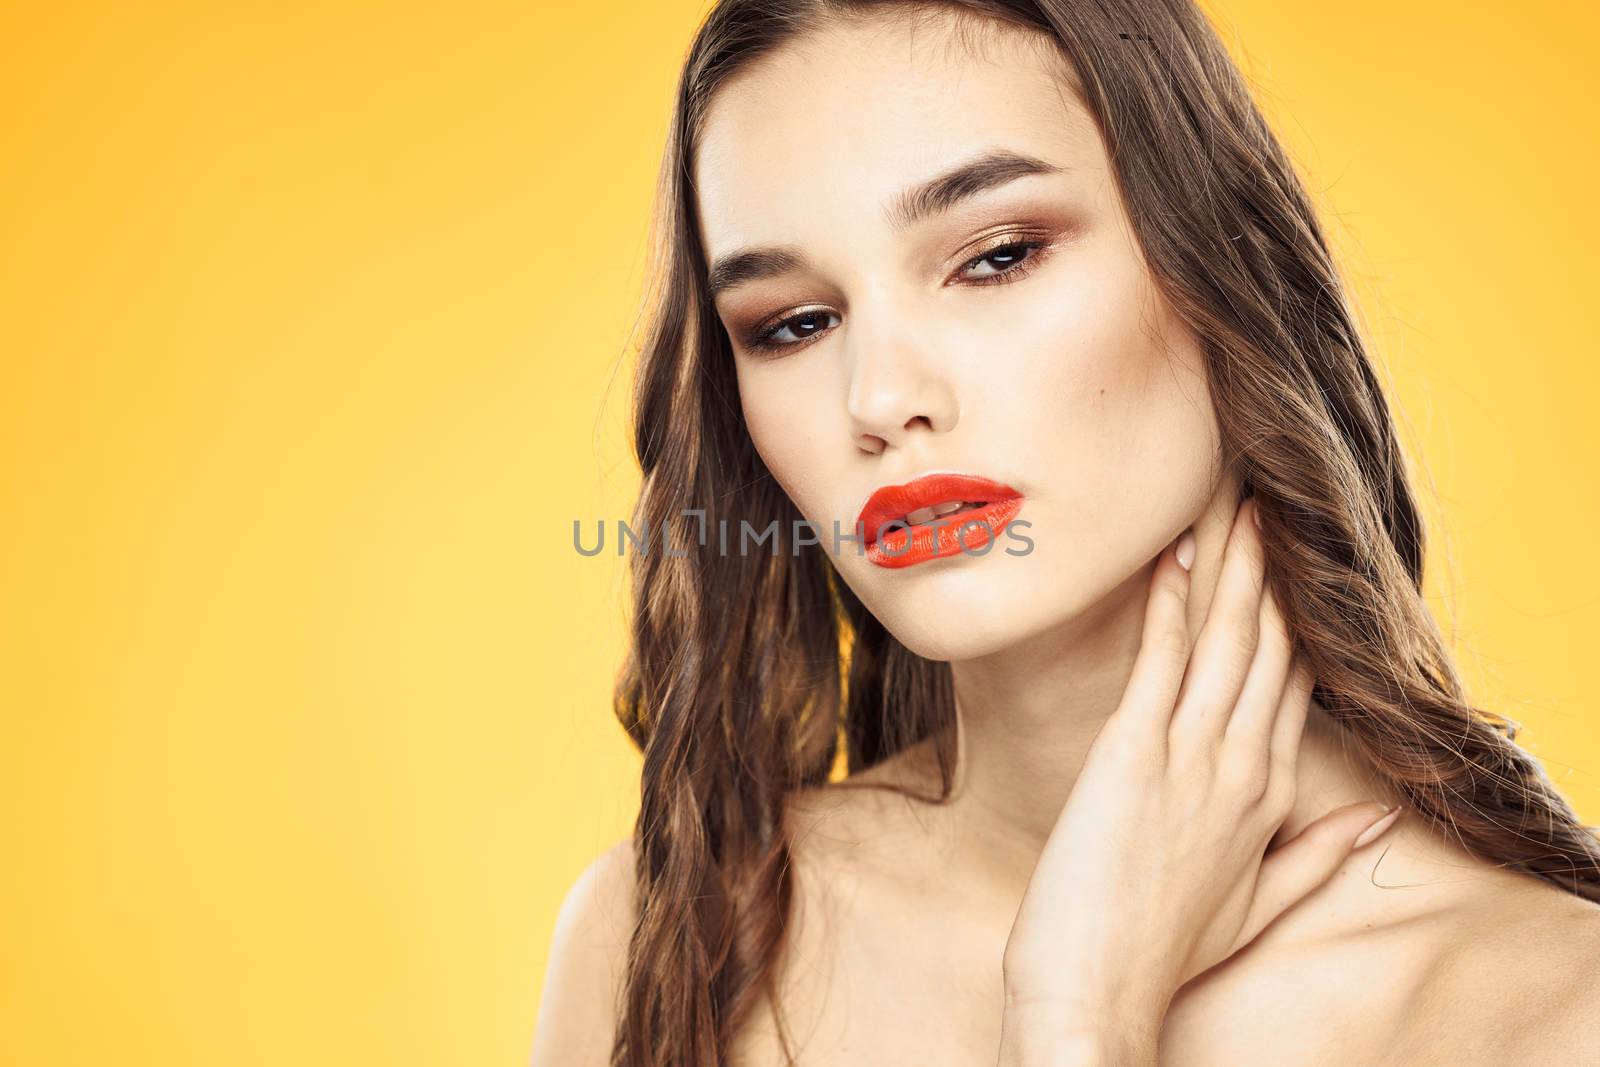 Beautiful brunette naked shoulders bright makeup red lips hairstyle close-up yellow background. High quality photo